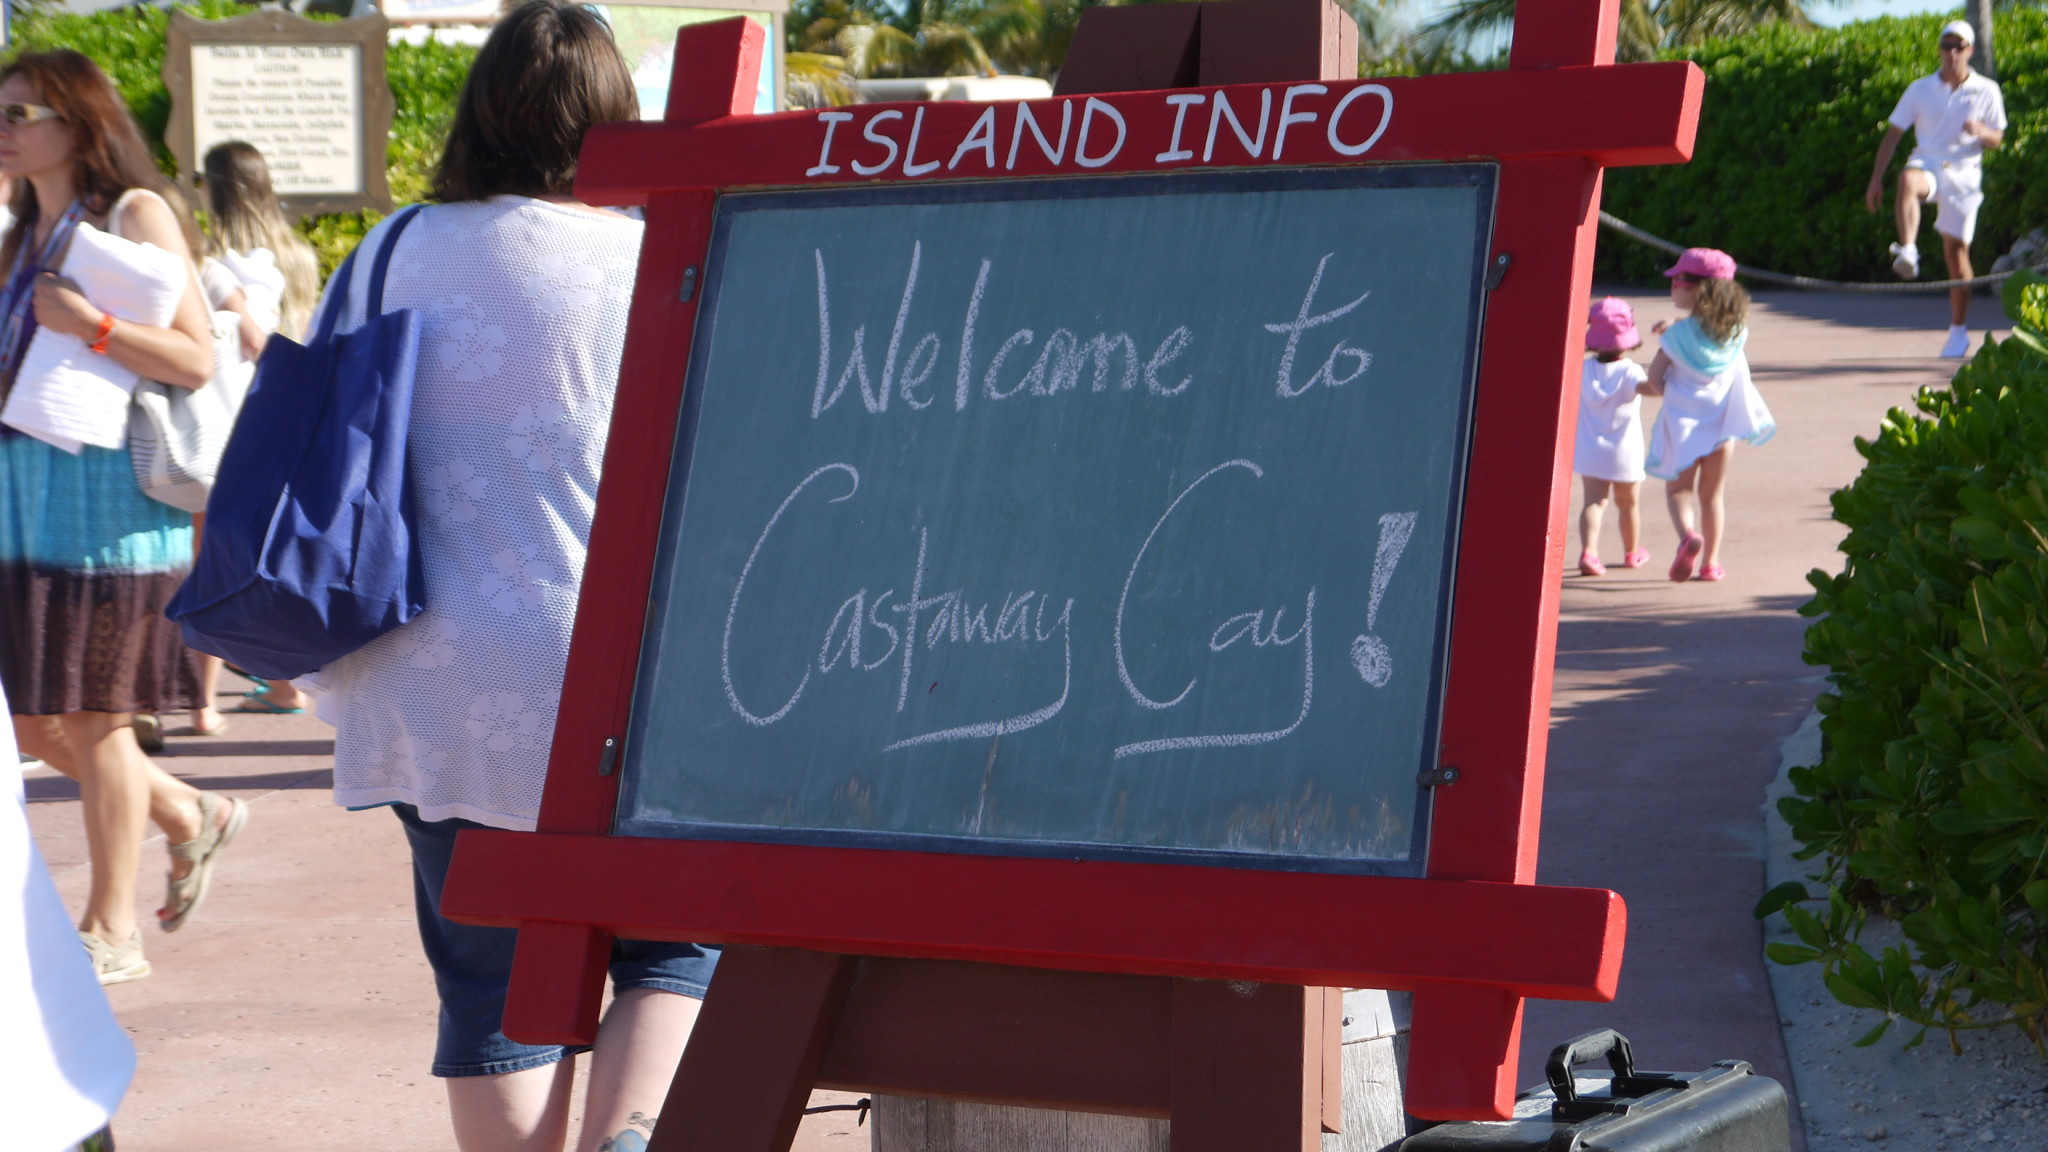 7 Tips You Need to Know About Disney’s Castaway Cay